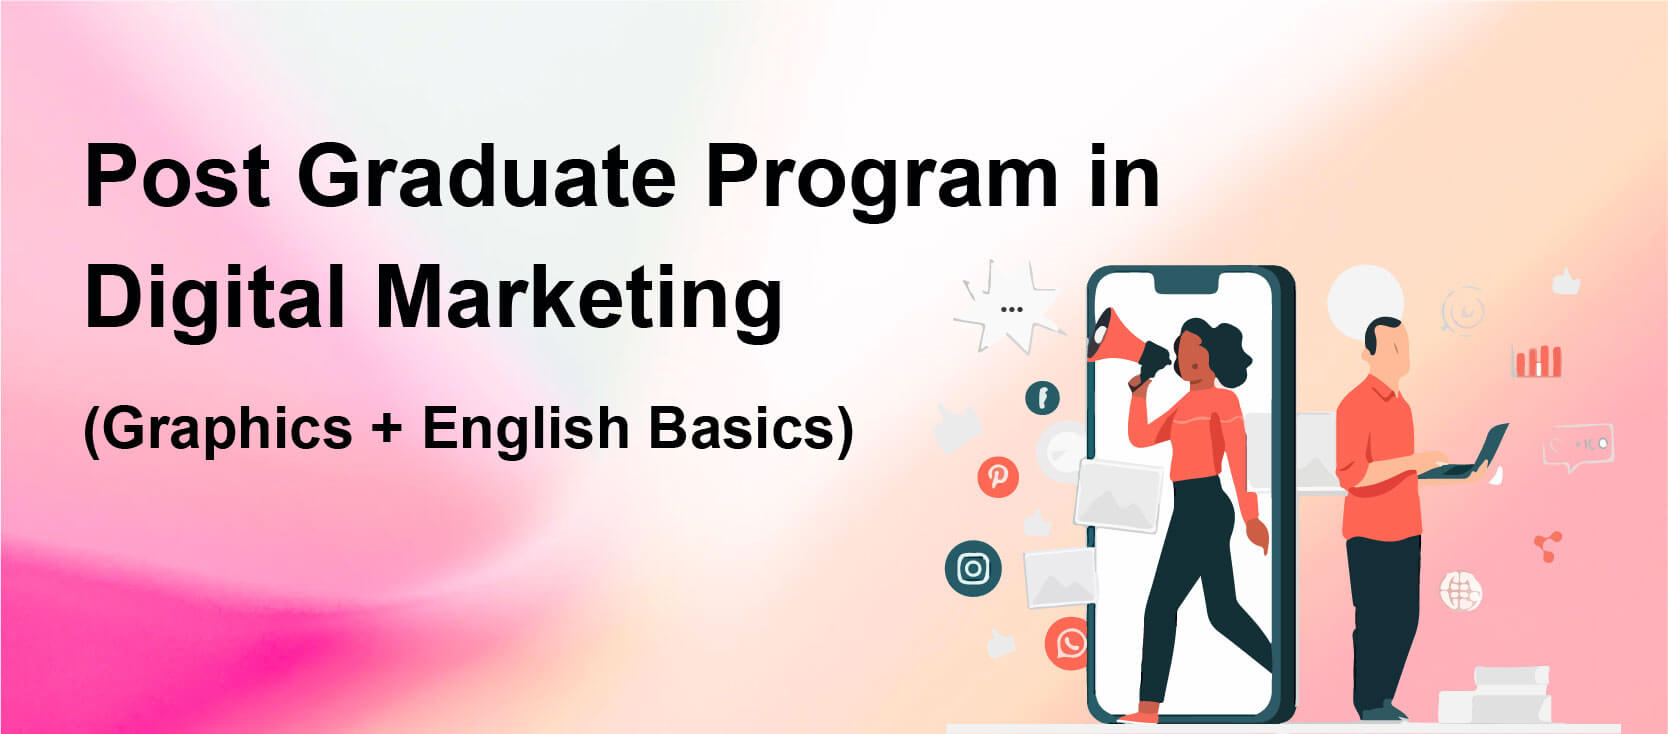 PG in Digital Marketing Course